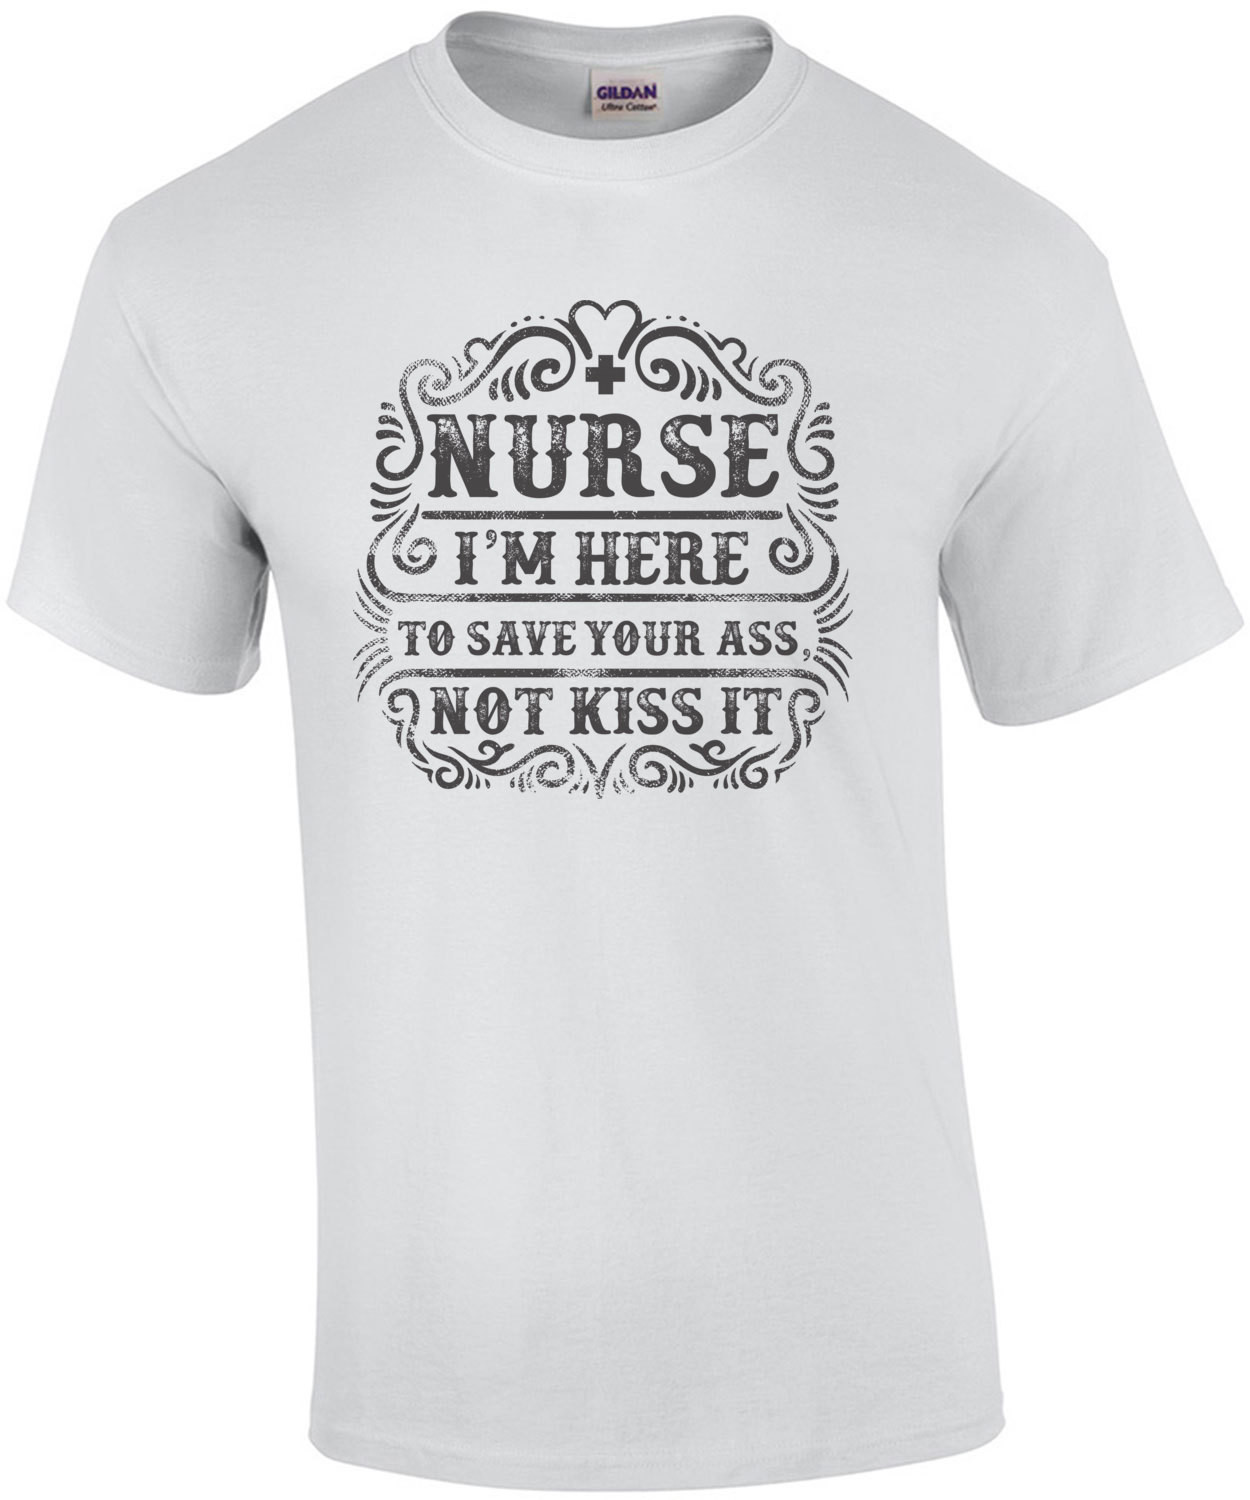 Nurse I'm Here To Save Your Ass Not Kiss It T-Shirt